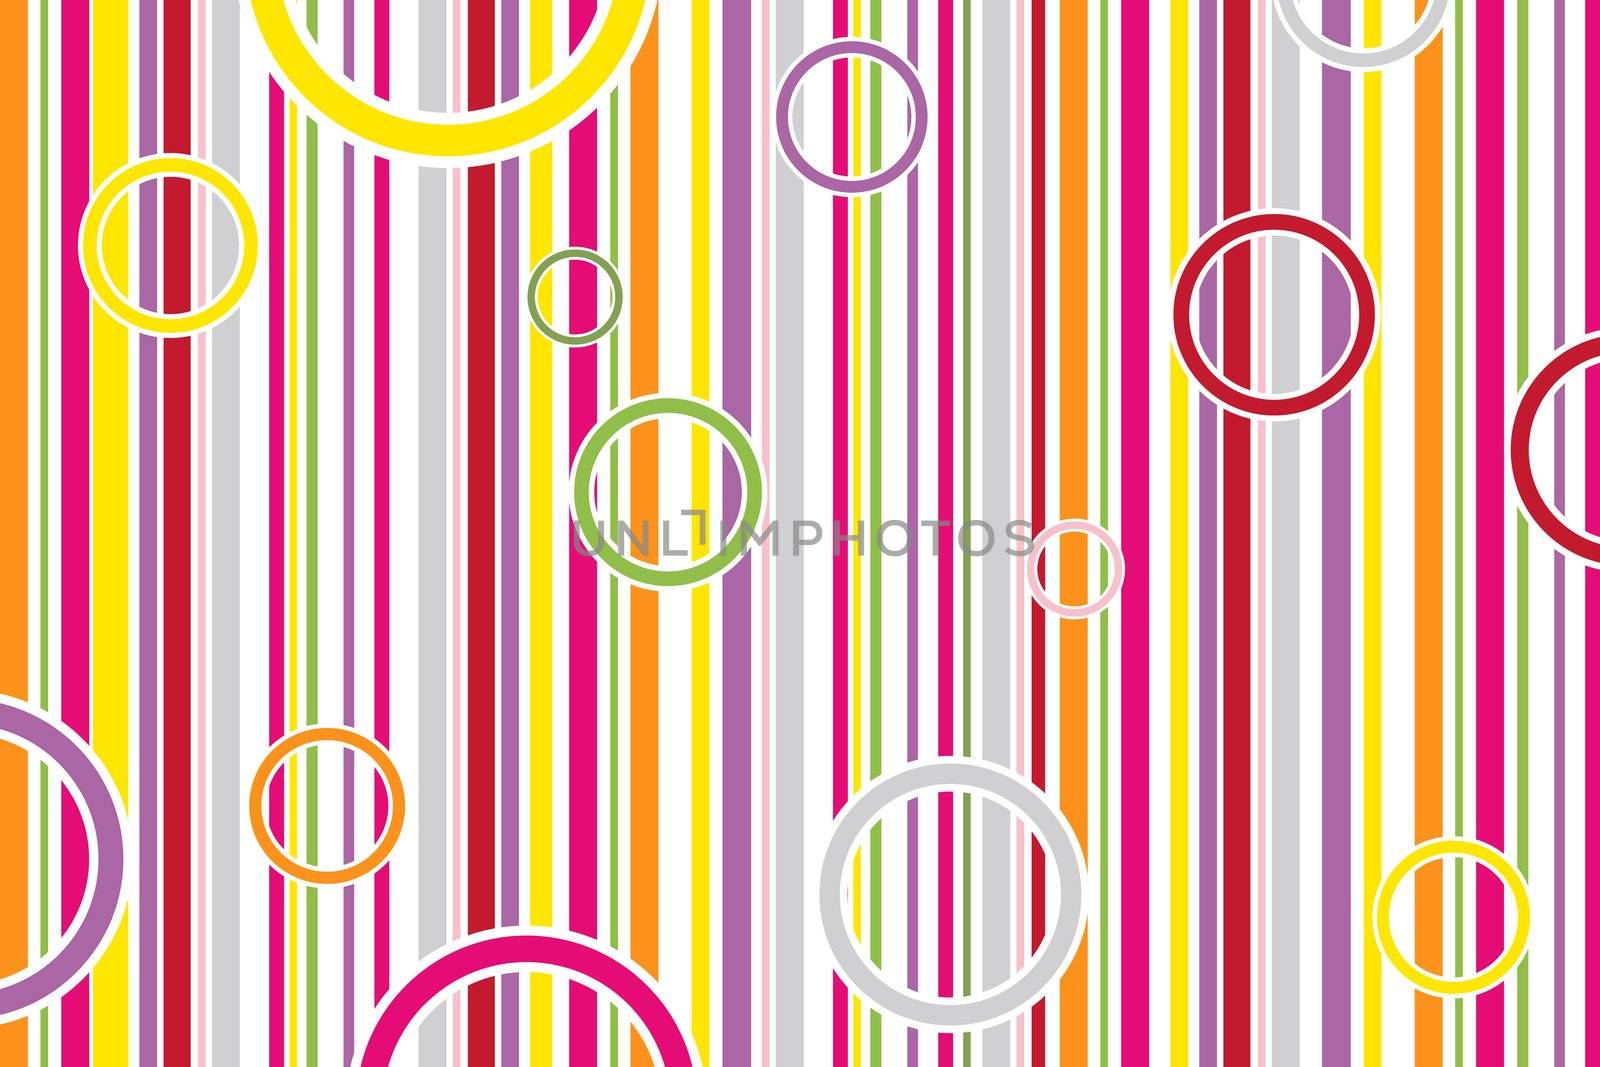 colorful abstract vector stripes and circles, art illustration